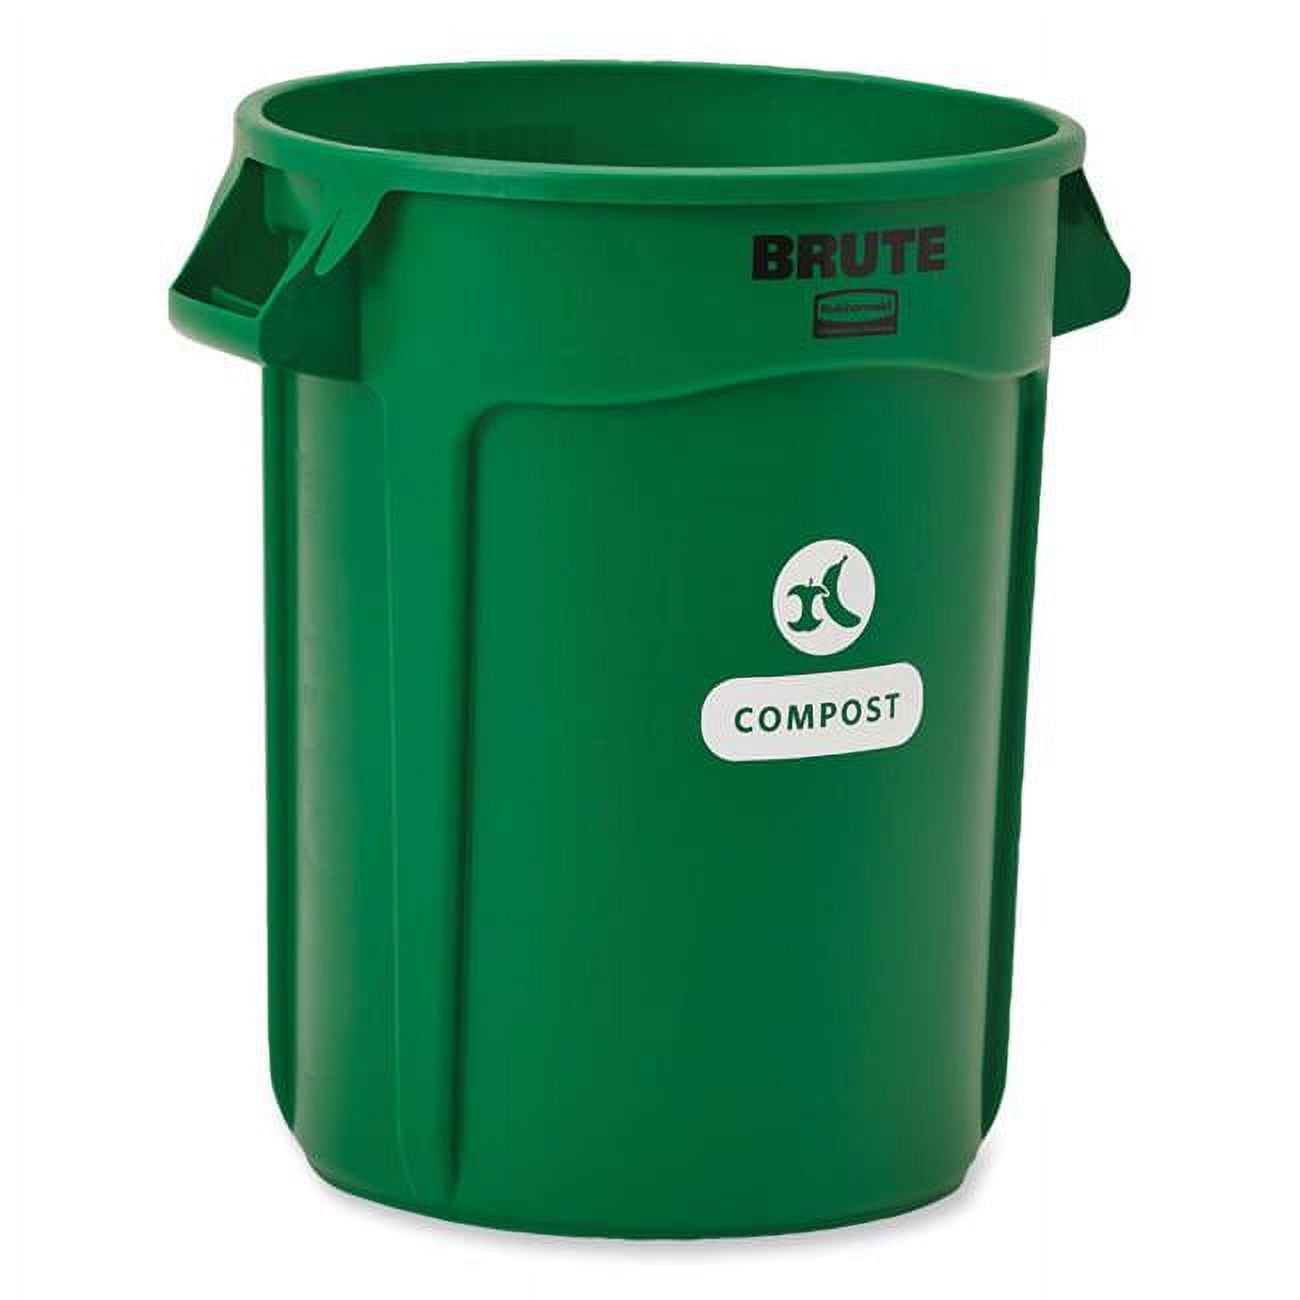 Rubbermaid Commercial Products Brute 32 Gal. Grey Round Vented